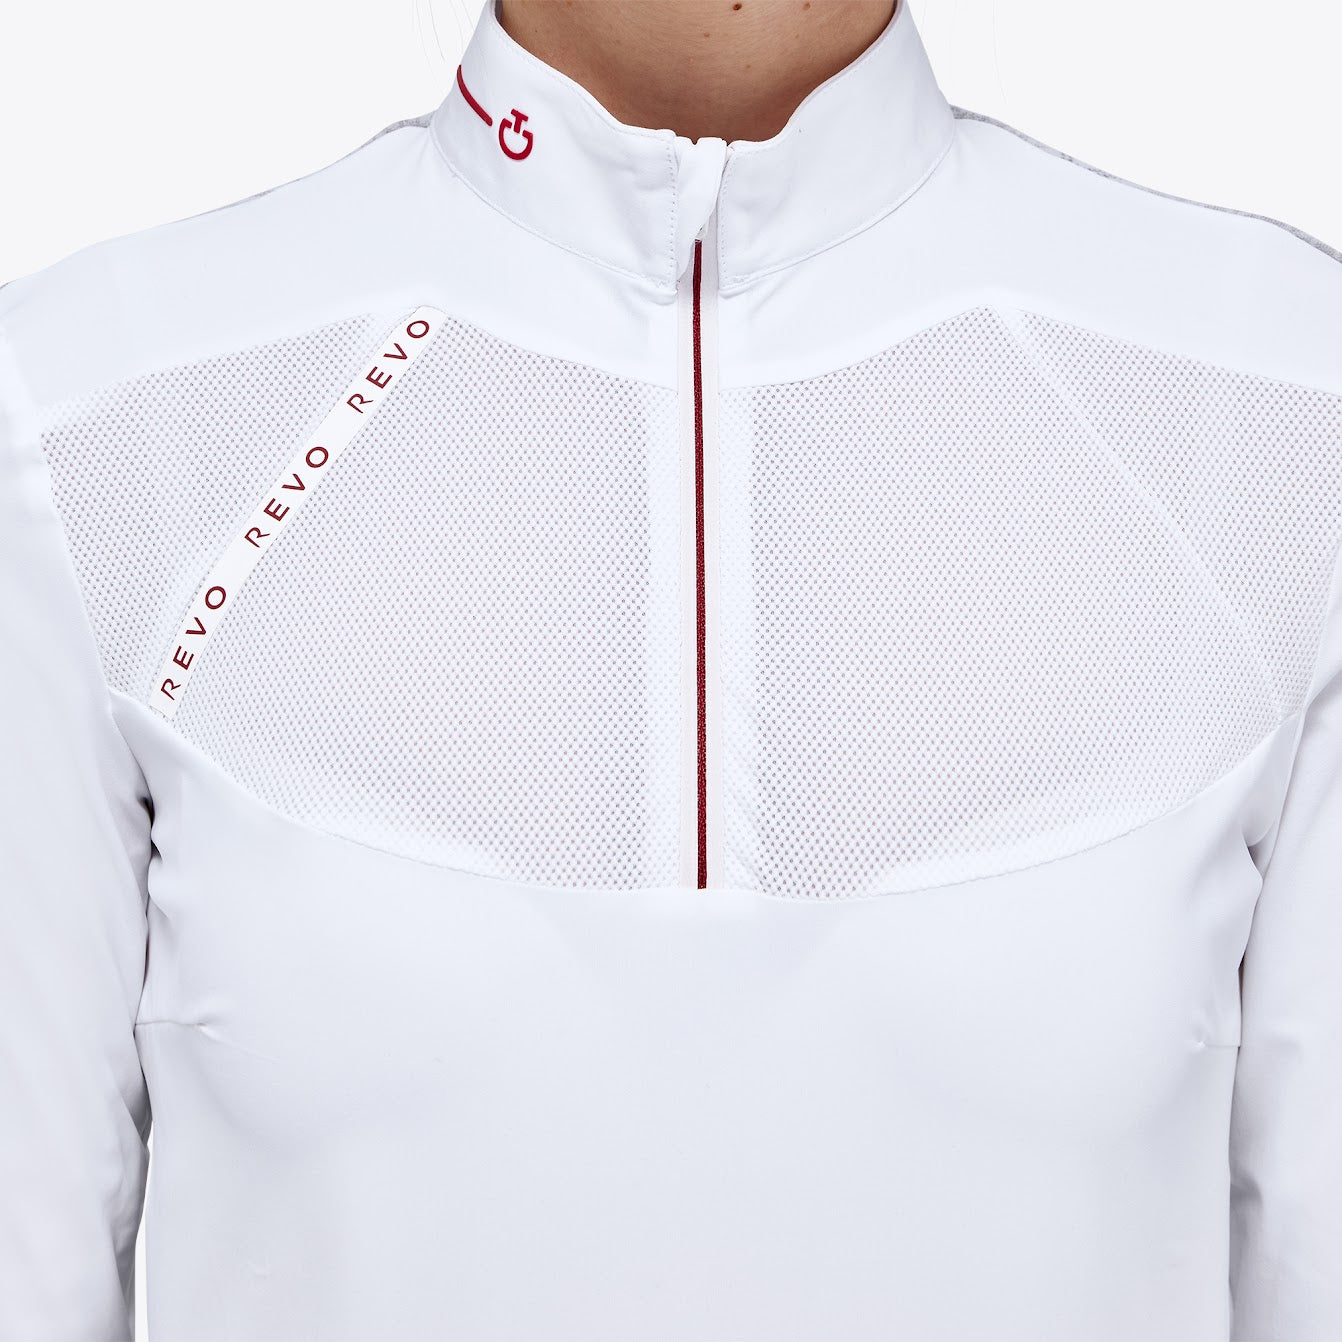 Cavalleria Toscana Revo Red Label Tech Knit Show Shirt has the iconic Revo jersey mesh back for maximum movement and comfort. Revo detailing in fed across the front with zip opening 